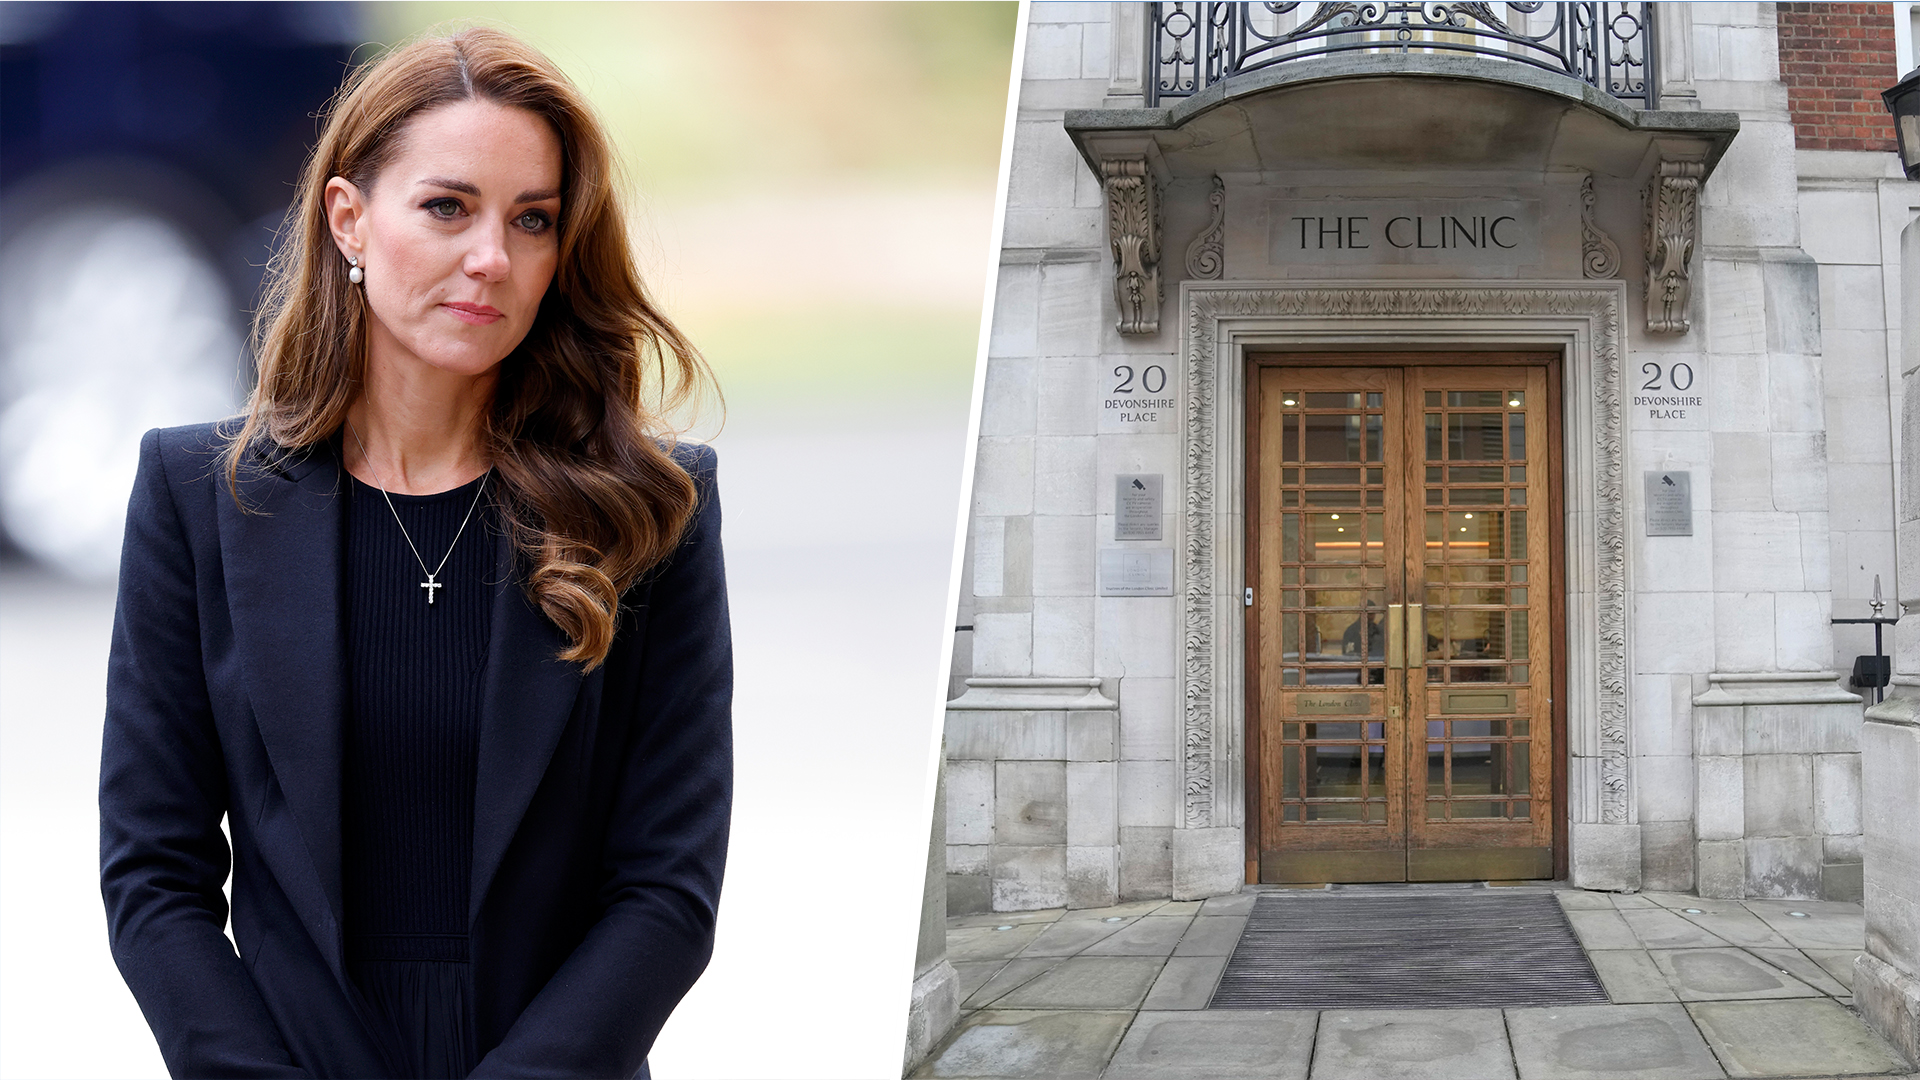 Clinic staffer allegedly tried to access Kate medical records: report